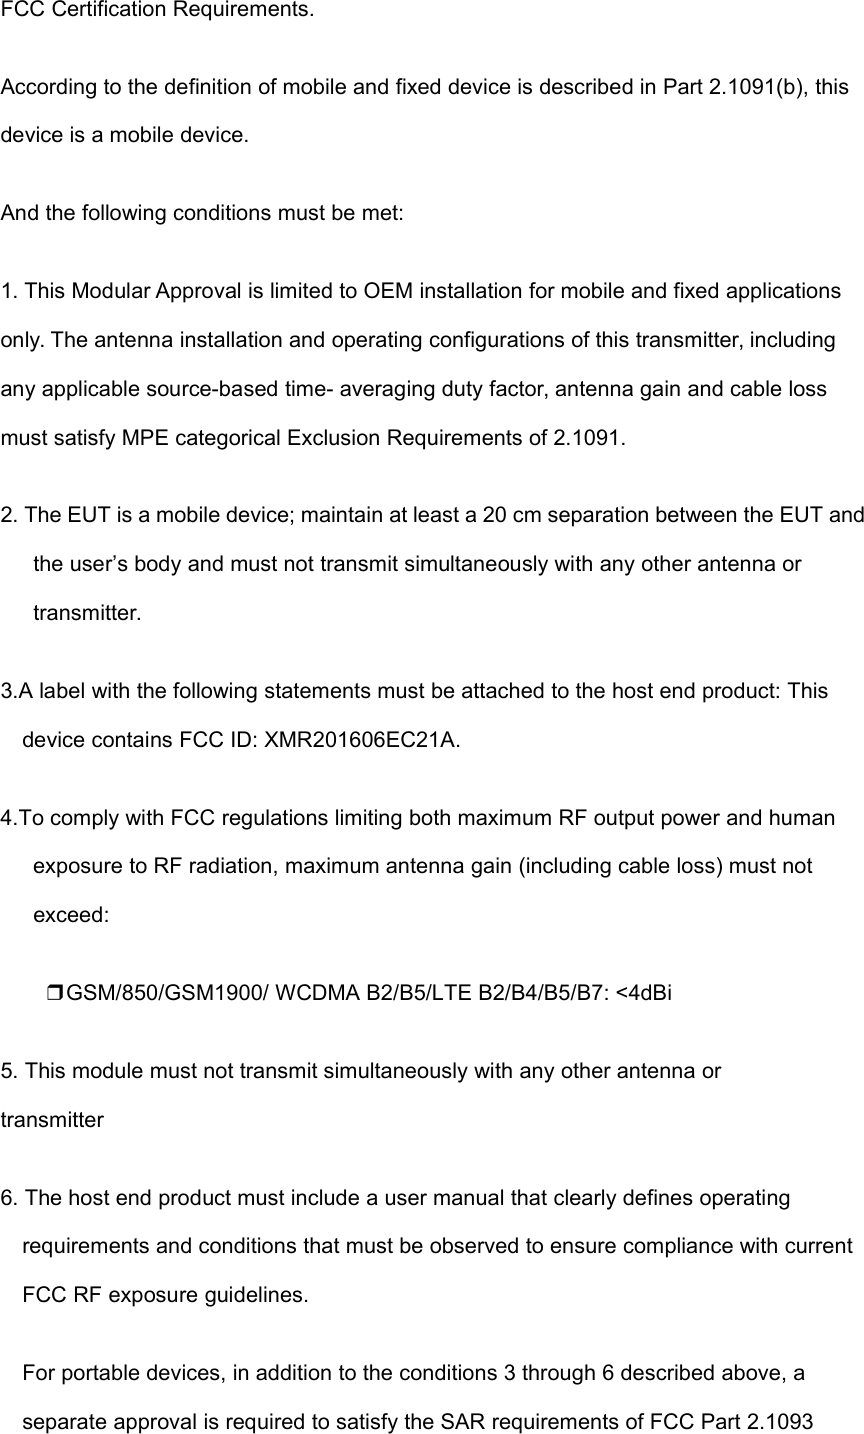 FCC Certification Requirements.According to the definition of mobile and fixed device is described in Part 2.1091(b), thisdevice is a mobile device.And the following conditions must be met:1. This Modular Approval is limited to OEM installation for mobile and fixed applicationsonly. The antenna installation and operating configurations of this transmitter, includingany applicable source-based time- averaging duty factor, antenna gain and cable lossmust satisfy MPE categorical Exclusion Requirements of 2.1091.2. The EUT is a mobile device; maintain at least a 20 cm separation between the EUT andthe user’s body and must not transmit simultaneously with any other antenna ortransmitter.3.A label with the following statements must be attached to the host end product: Thisdevice contains FCC ID: XMR201606EC21A.4.To comply with FCC regulations limiting both maximum RF output power and humanexposure to RF radiation, maximum antenna gain (including cable loss) must notexceed:❒GSM/850/GSM1900/ WCDMA B2/B5/LTE B2/B4/B5/B7: &lt;4dBi5. This module must not transmit simultaneously with any other antenna ortransmitter6. The host end product must include a user manual that clearly defines operatingrequirements and conditions that must be observed to ensure compliance with currentFCC RF exposure guidelines.For portable devices, in addition to the conditions 3 through 6 described above, aseparate approval is required to satisfy the SAR requirements of FCC Part 2.1093